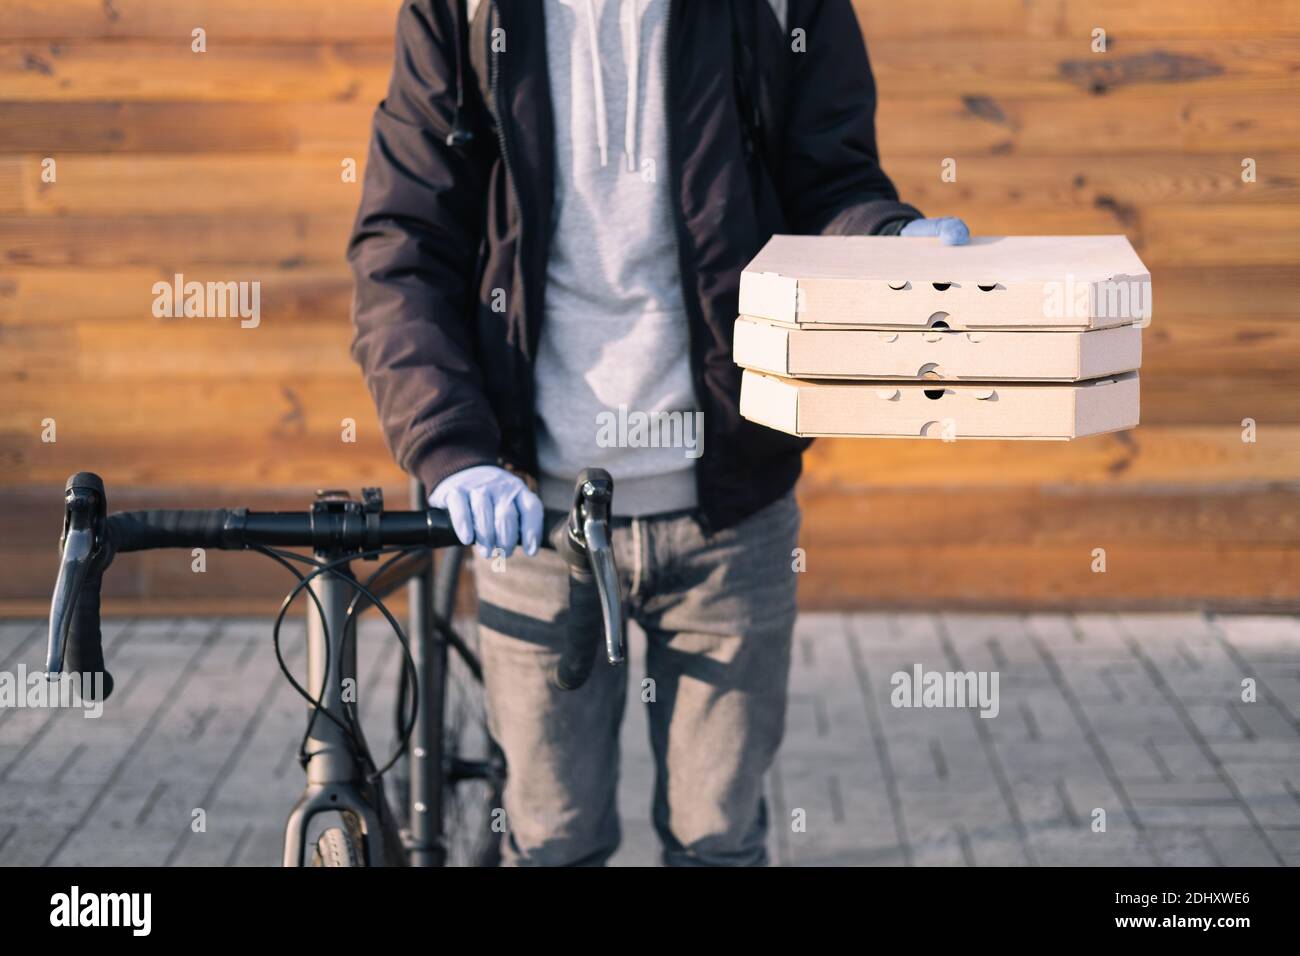 Bike delivery person holds pizza boxes in hand. Food delivery, bicycle courier at work, takeaway catering concept Stock Photo